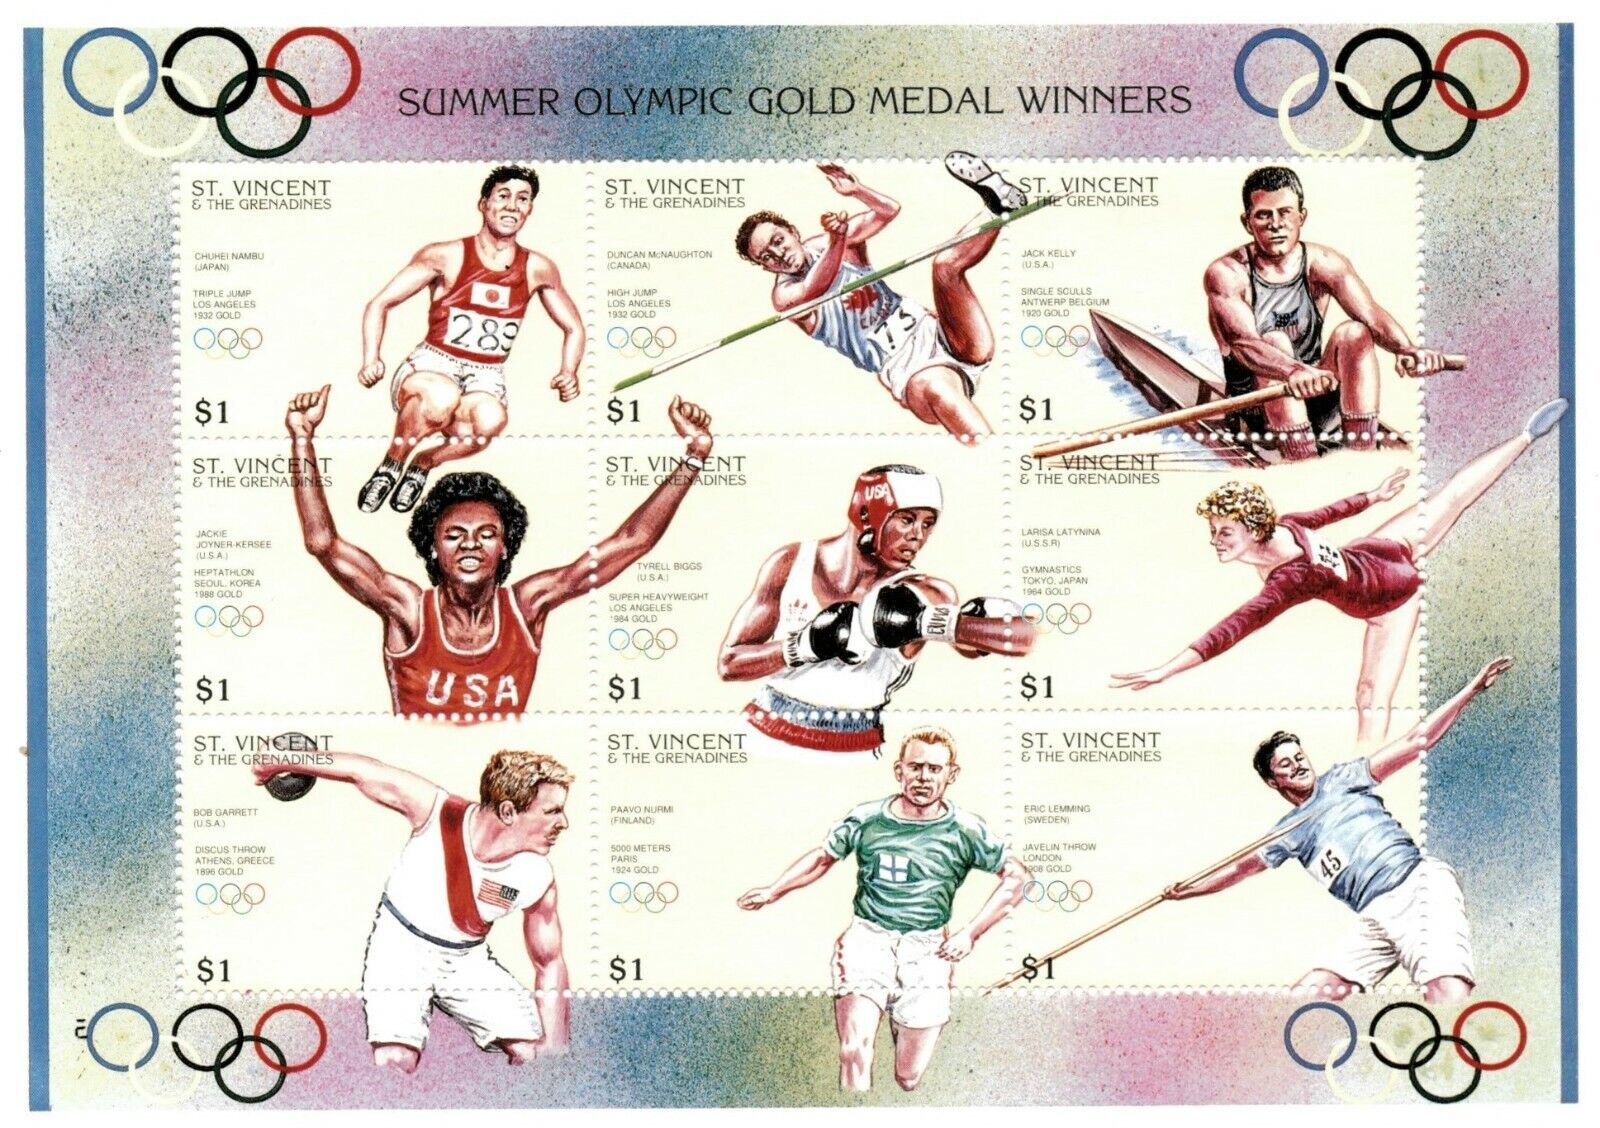 St. Vincent 1996 - Olympic Gold Medal Winners - Sheet of 9 Stamps Scott 2319 MNH